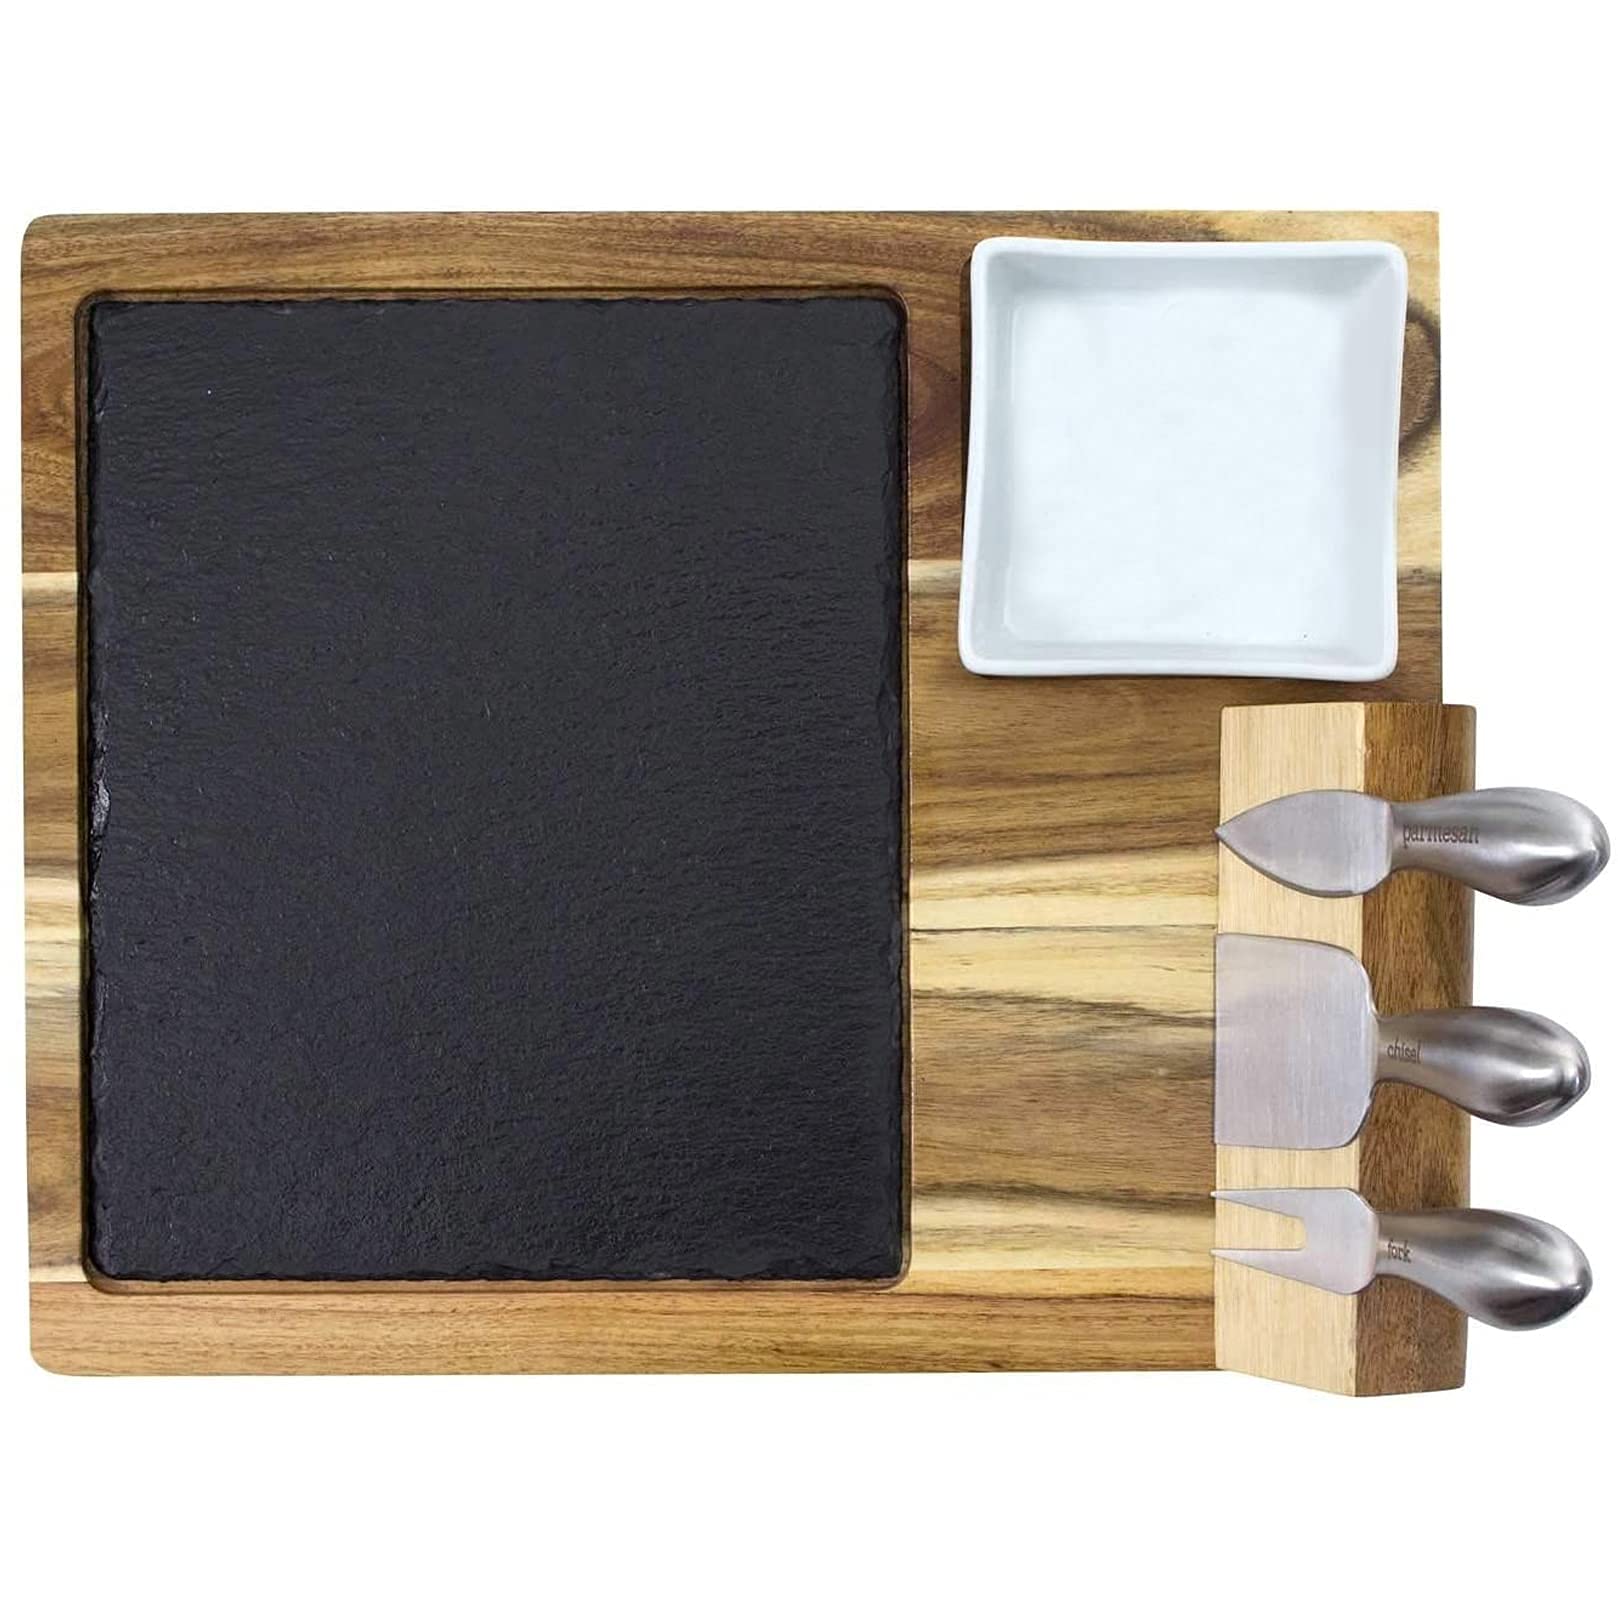 Zelancio Slate Cheese Board Set, 10 Piece Set Includes 4 Stainless Steel Cheese Tools, Premium Acacia Serving Tray with Slate Board, and Porcelain Olive Dish